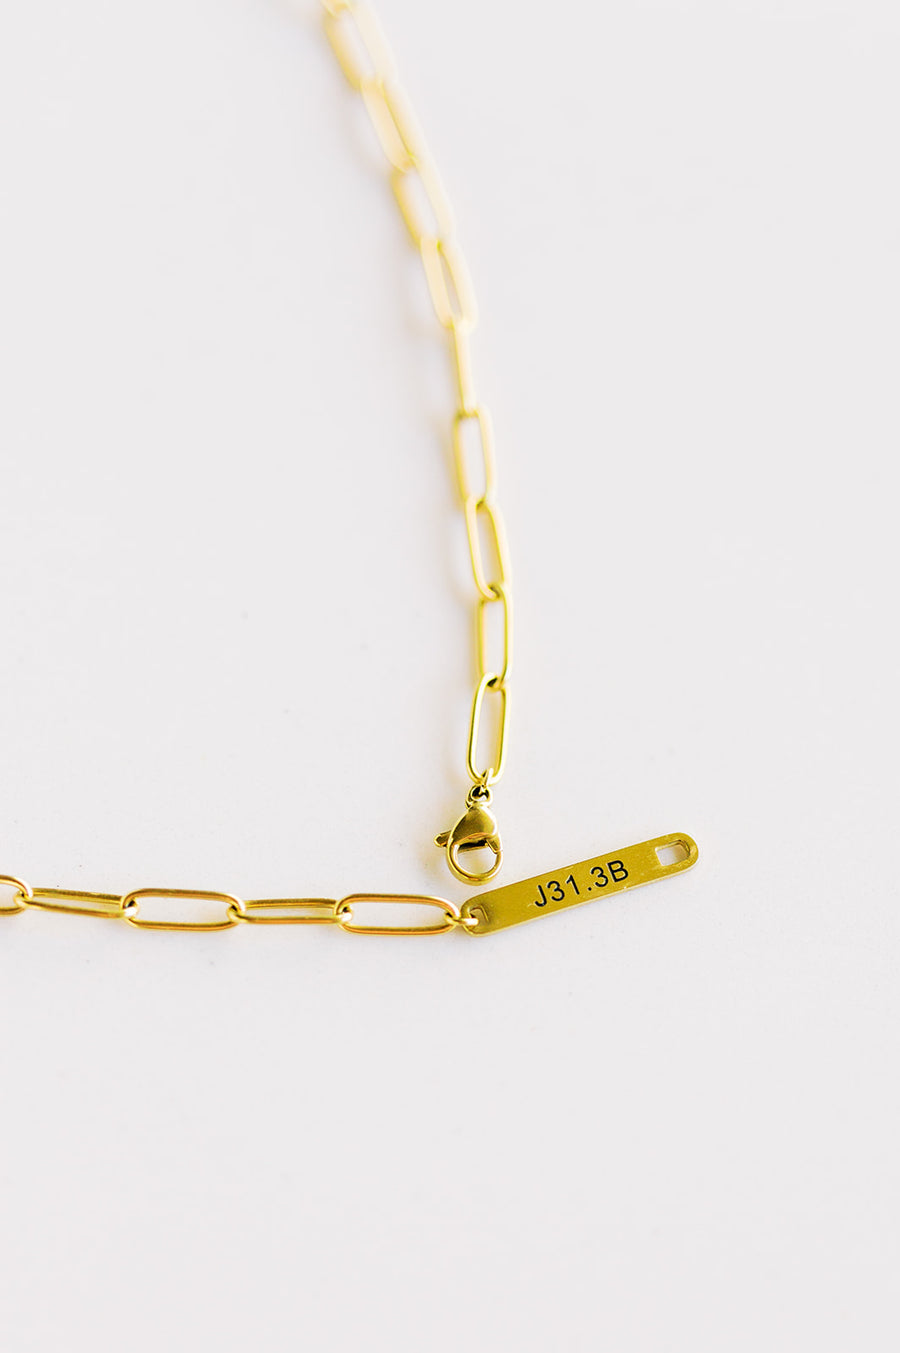 Jeremiah 31:3b Paperclip Necklace